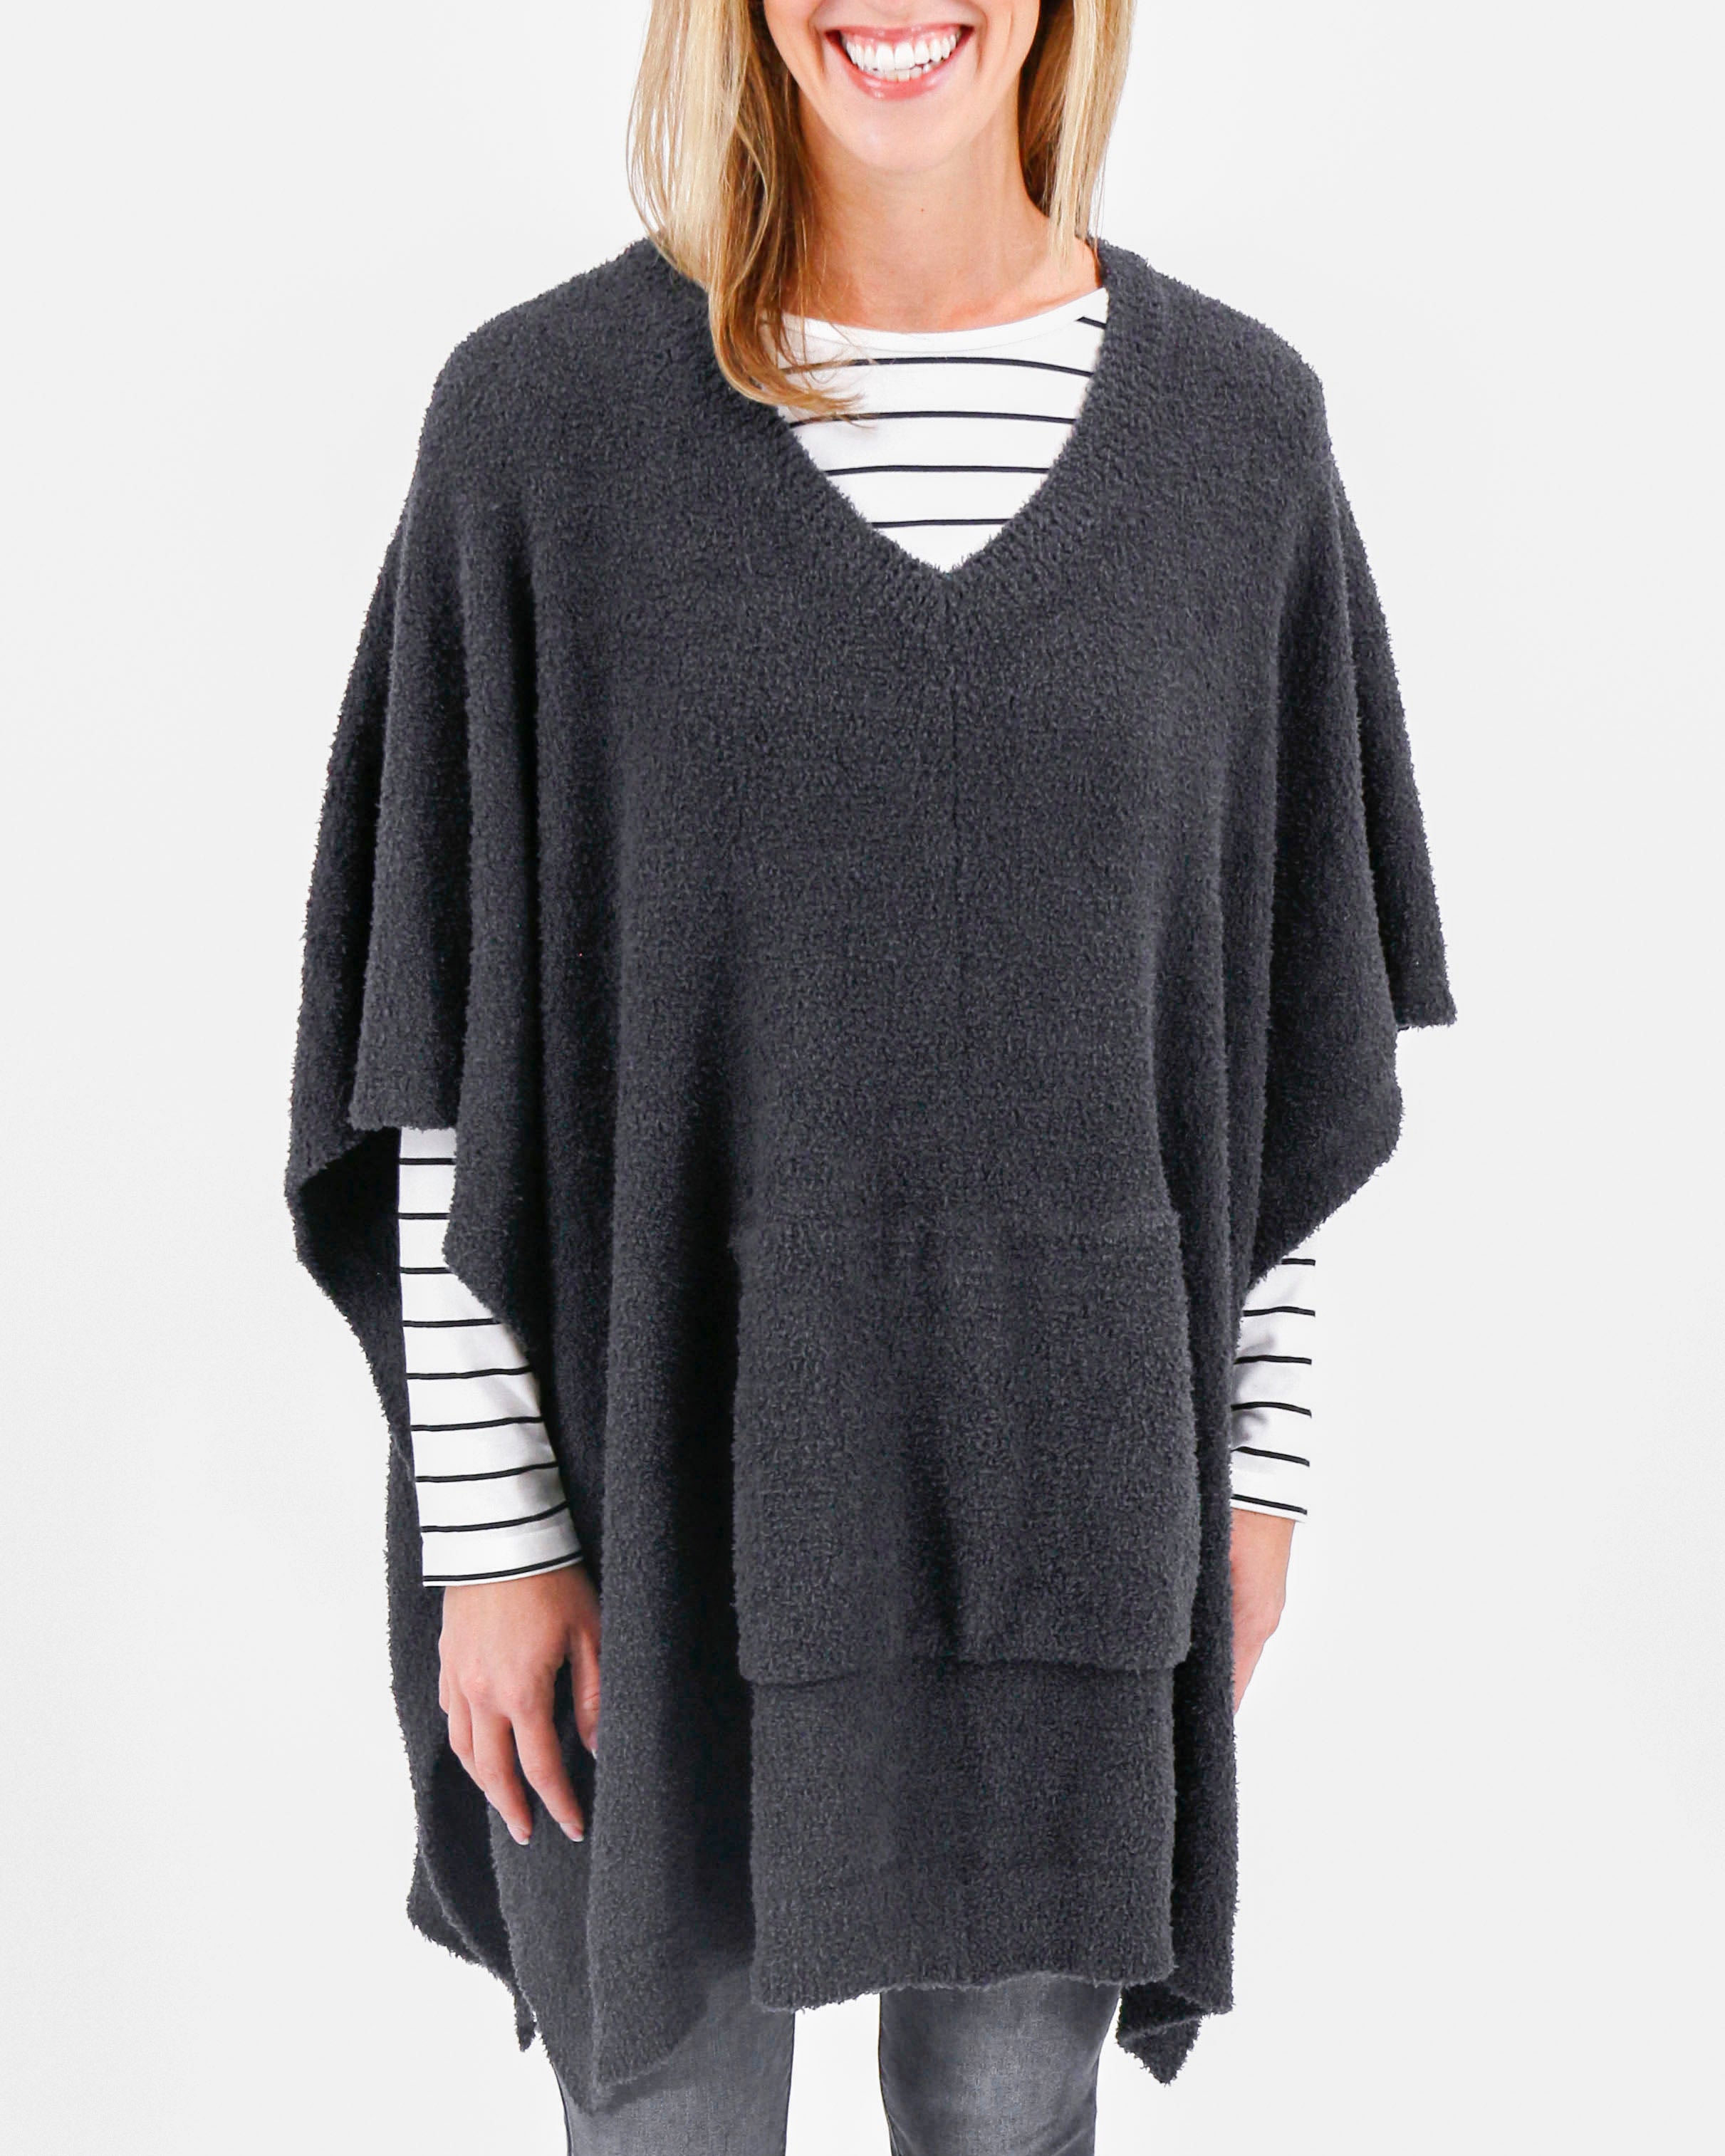 Cloud Blanket Poncho in Charcoal - Grace and Lace